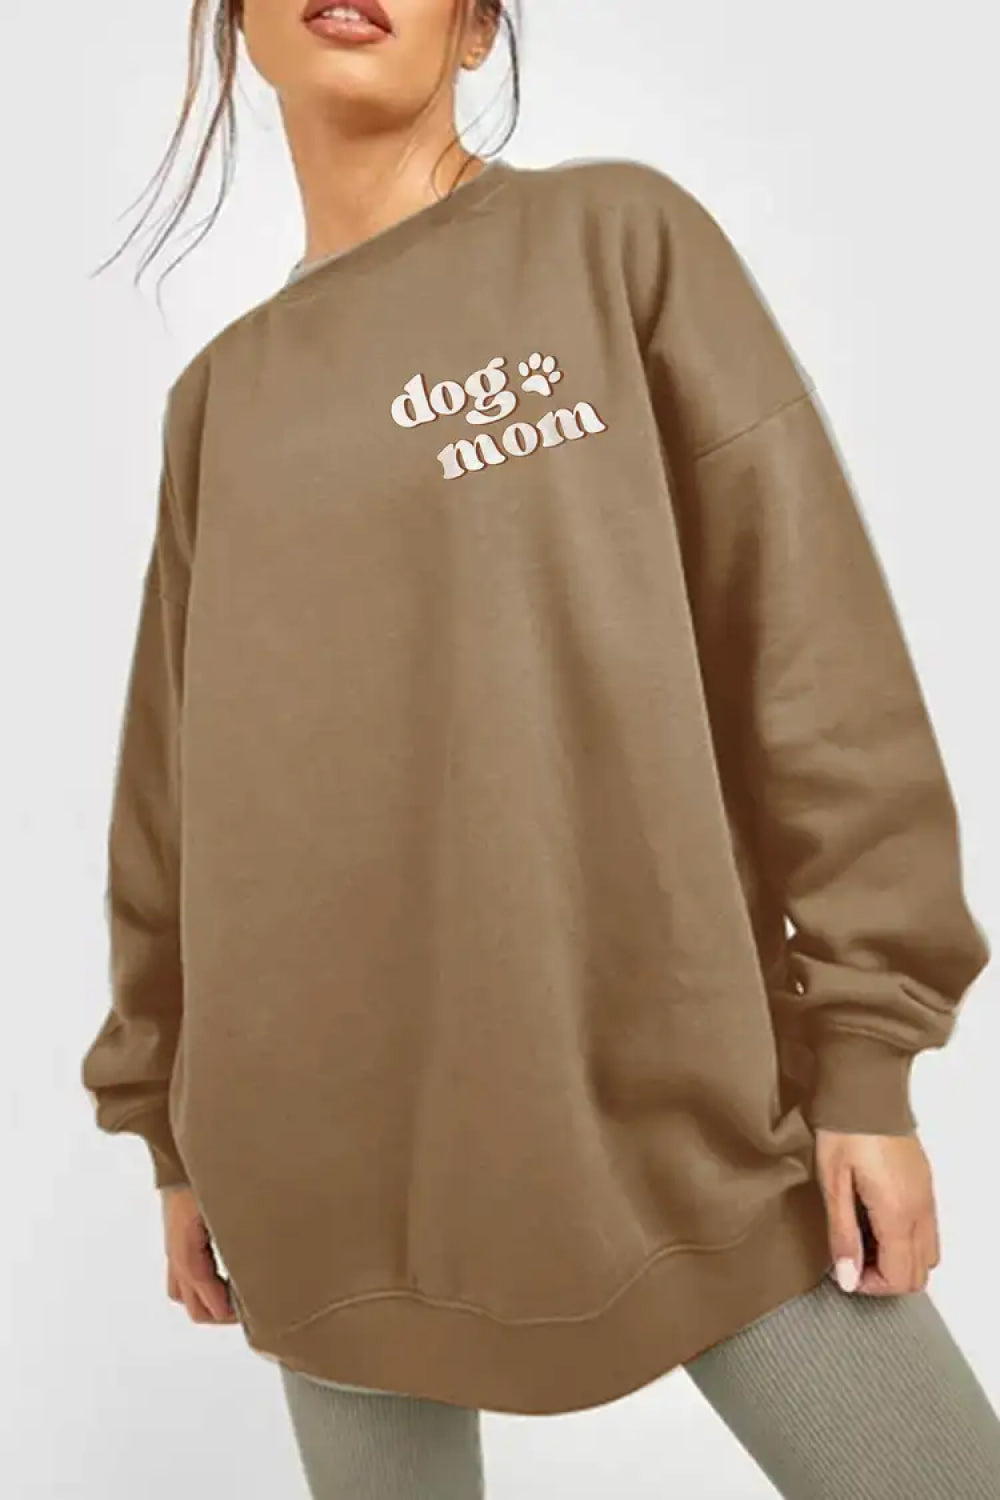 Simply Love Full Size Round Neck Dropped Shoulder DOG MOM Graphic Sweatshirt